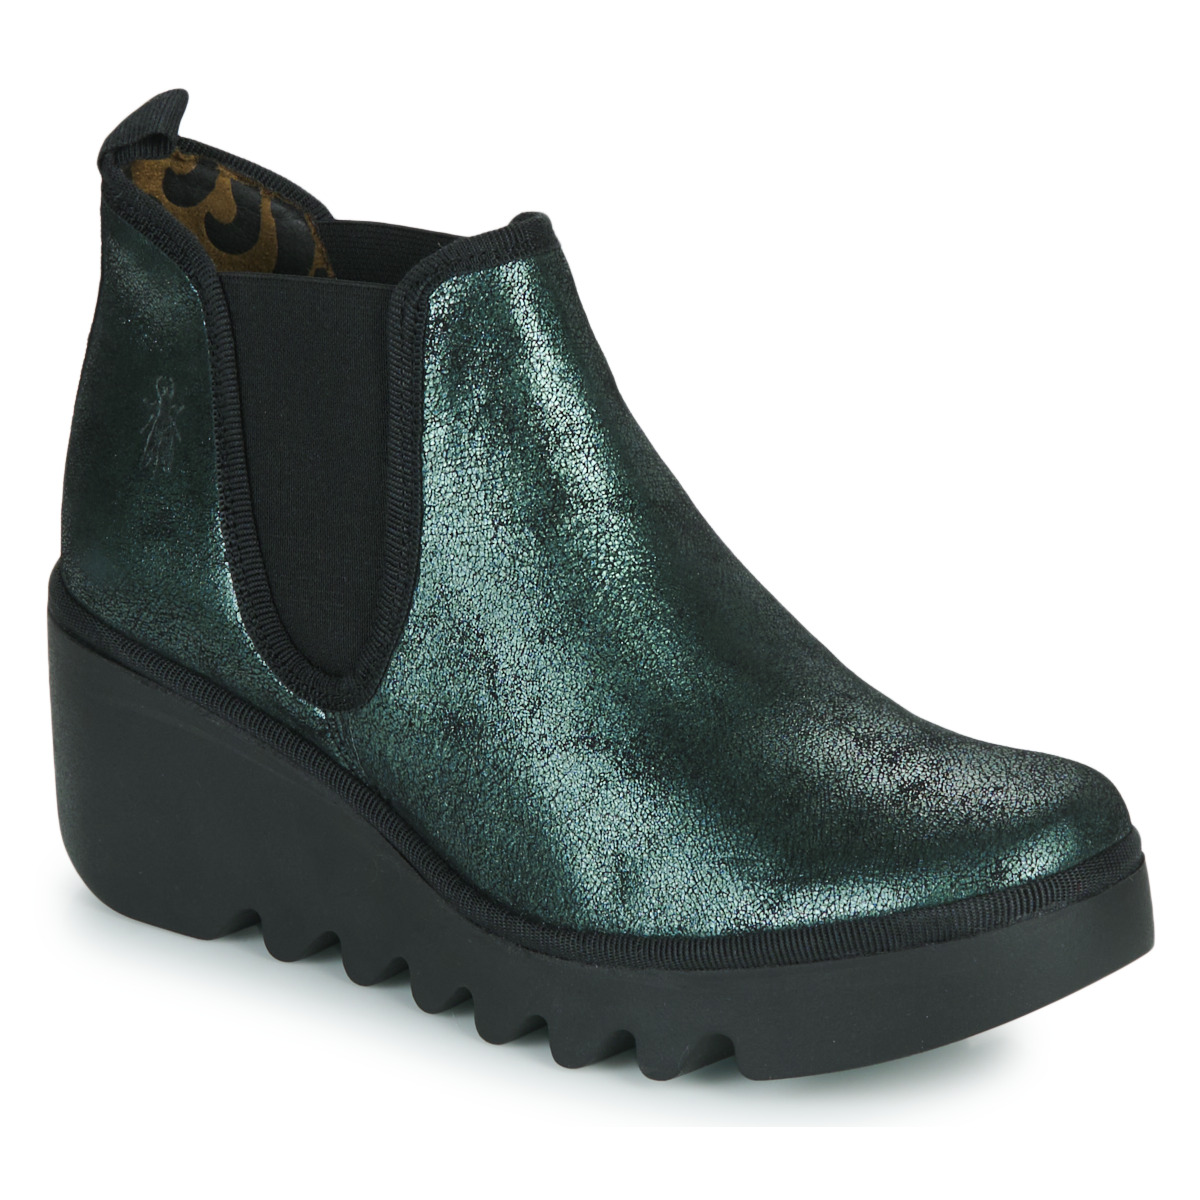 Chaussures Femme Boots Fly London BYNE Vert